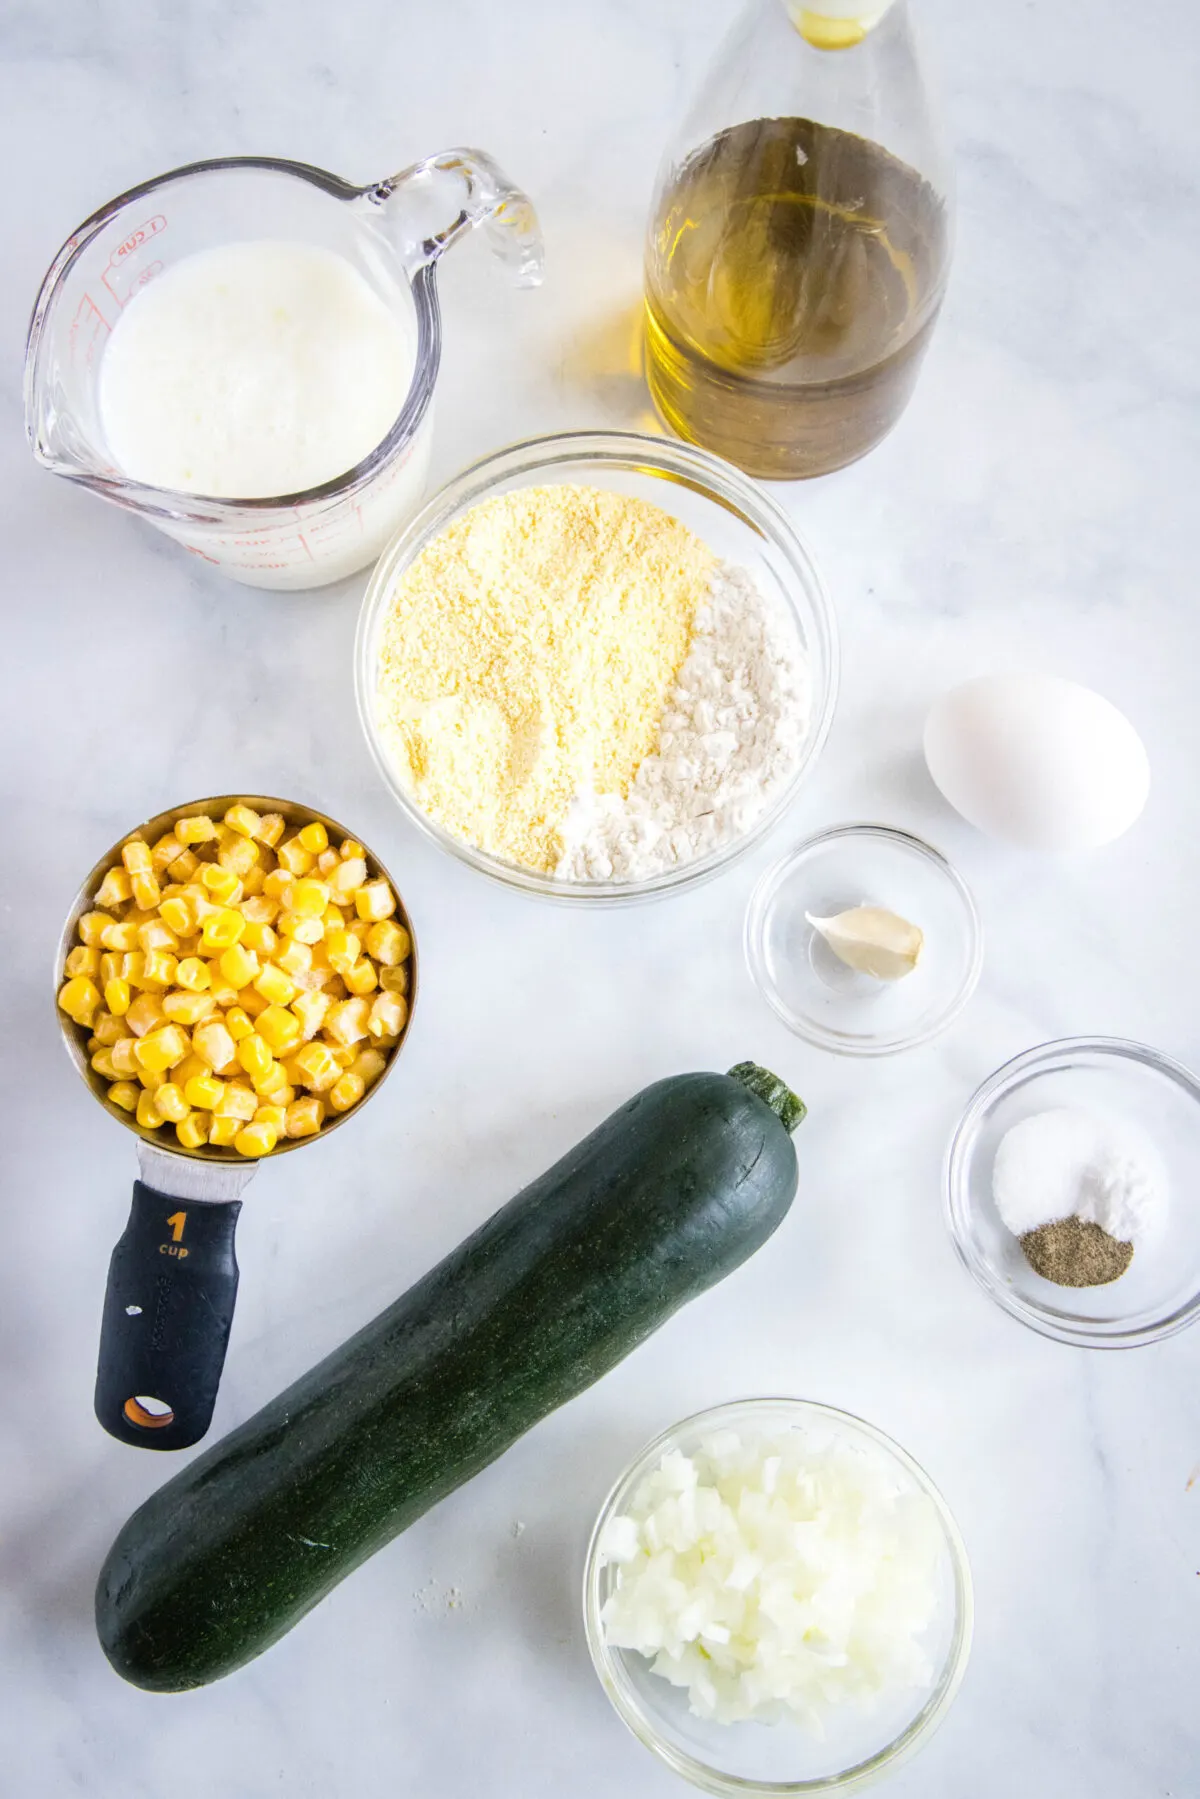 Overhead view of the ingredients needed for zucchini fritters with corn: A whole zucchini, a measuring cup of corn, a pyrex of buttermilk, a bowl of chopped onions, a bowl of cornmeal, an egg, a bowl of garlic, and a bowl of salt, pepper, and baking soda